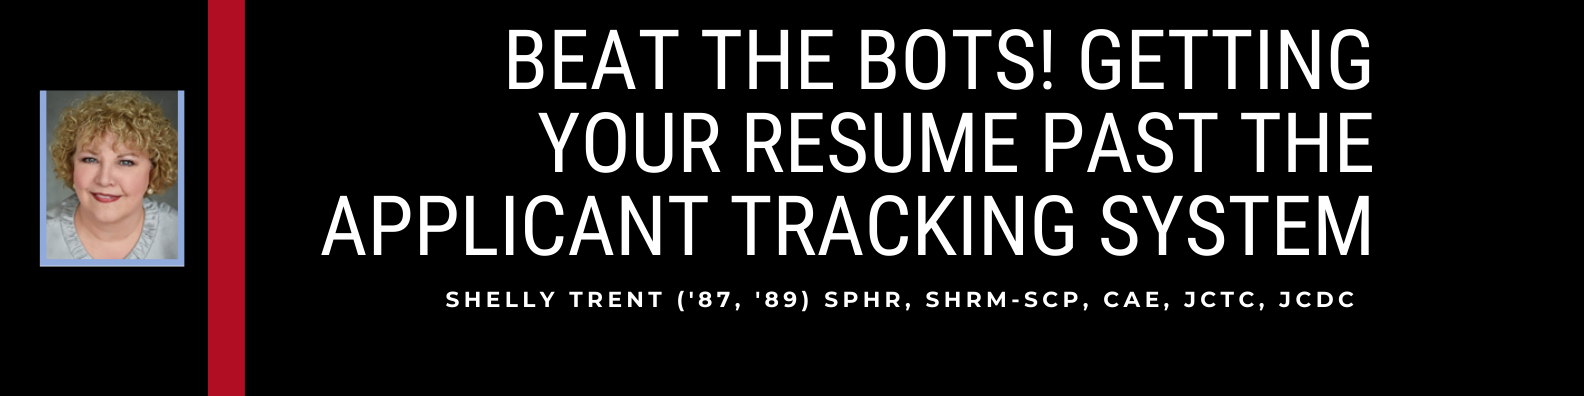 Image for Beat the Bots! Getting Your Resume Past the Applicant Tracking System webinar